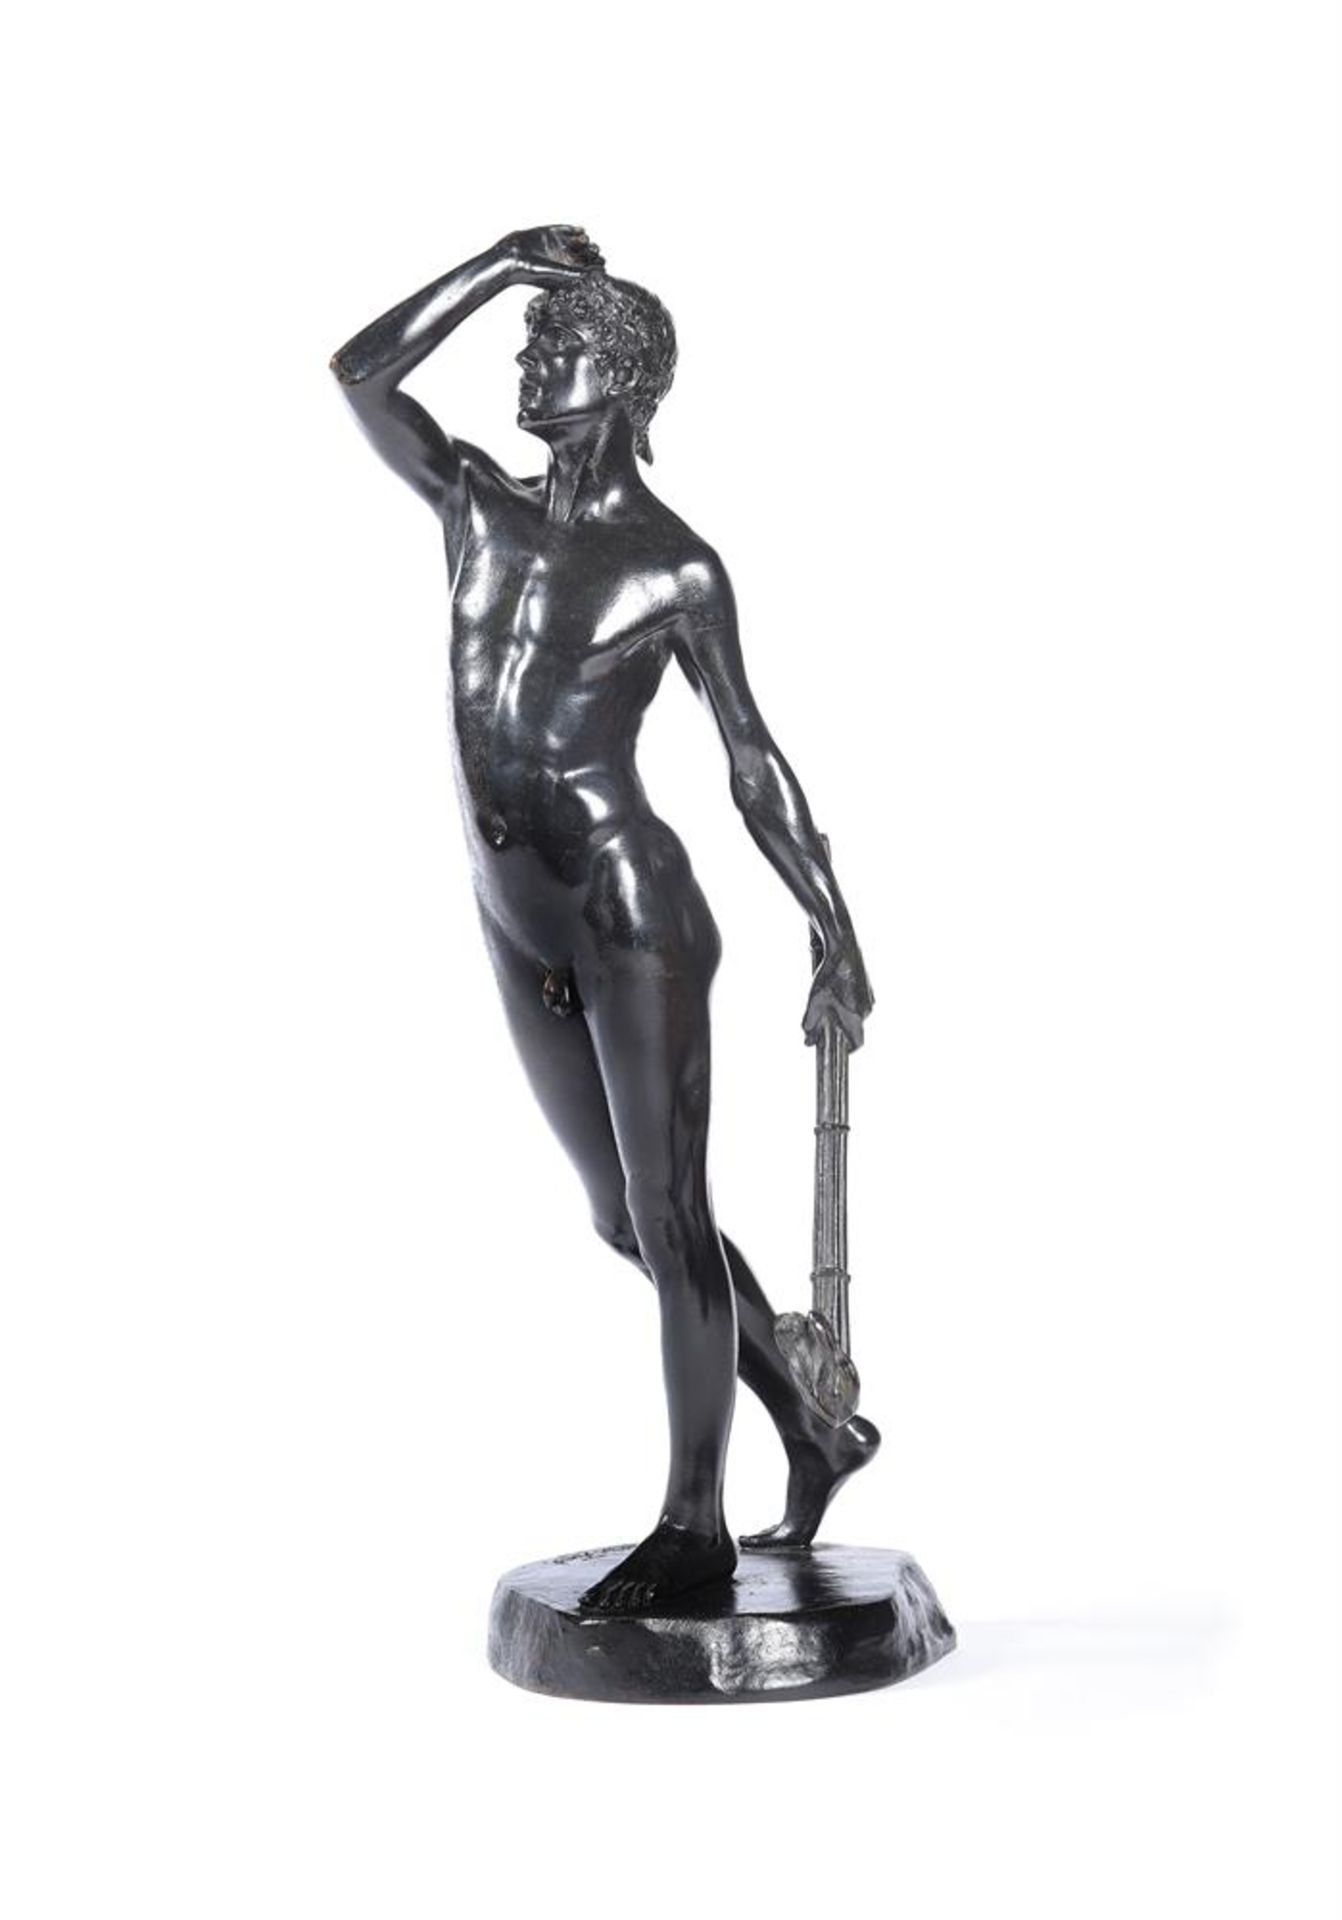 EDWARD ONSLOW FORD RA 1852-1901, A BRONZE MODEL OF A YOUTH PROBABLY LINUS